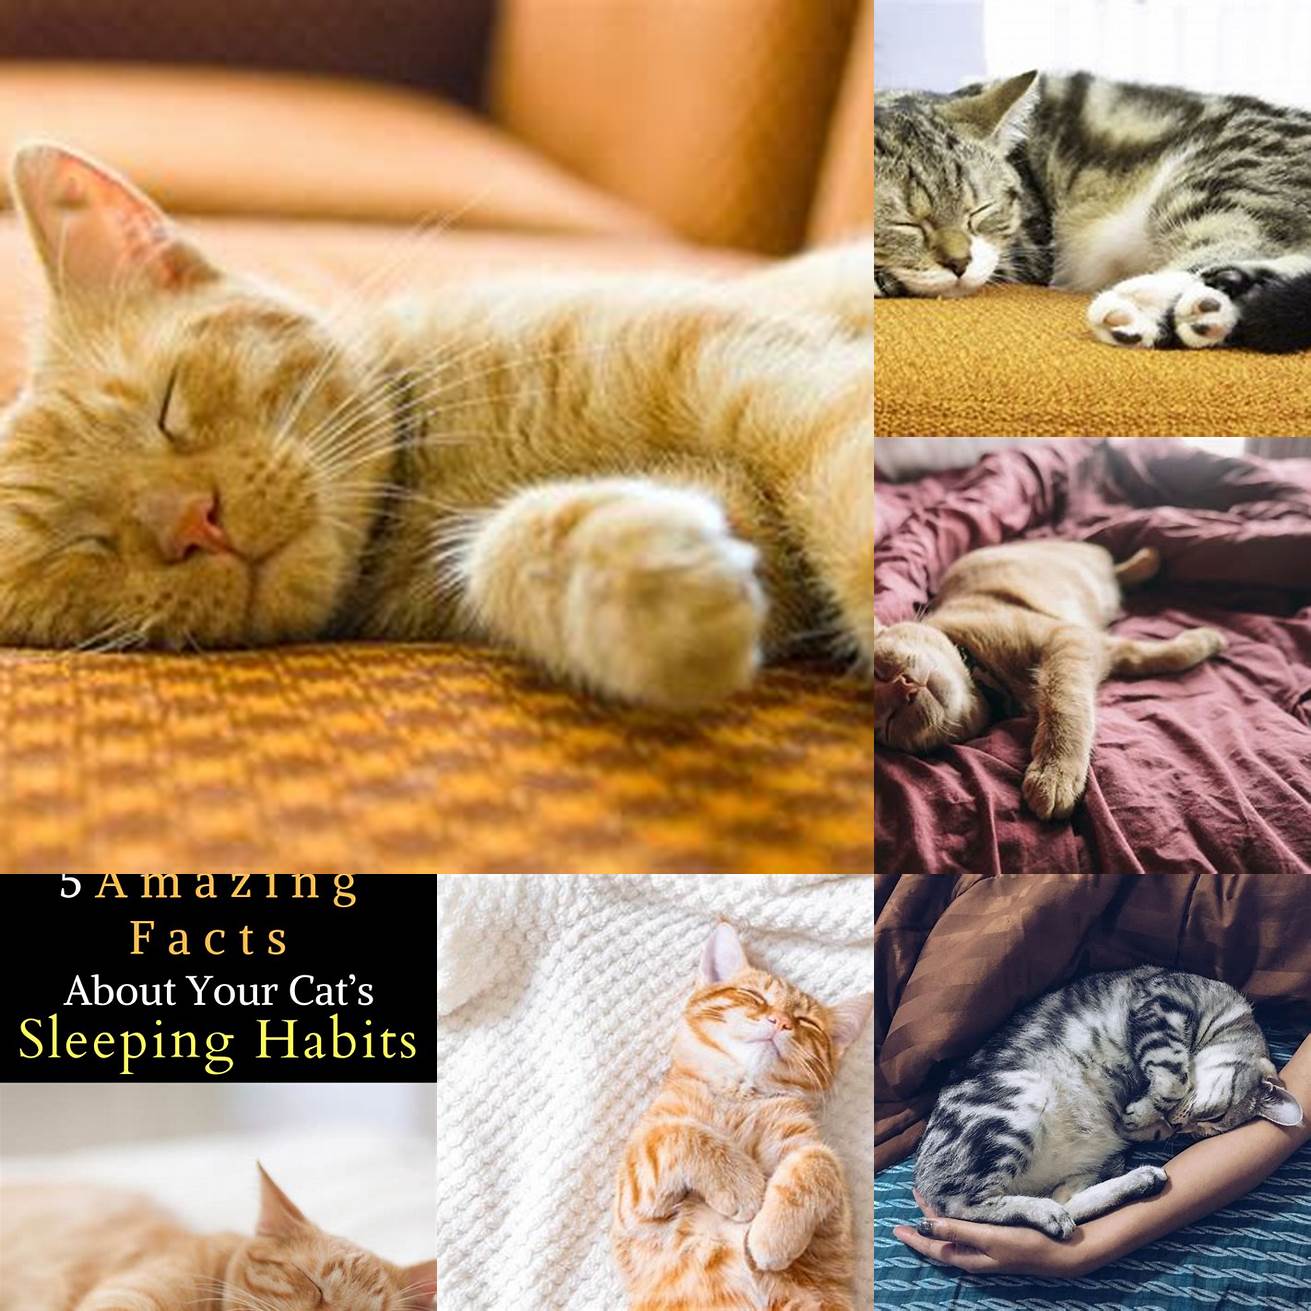 Consider Your Cats Sleeping Habits